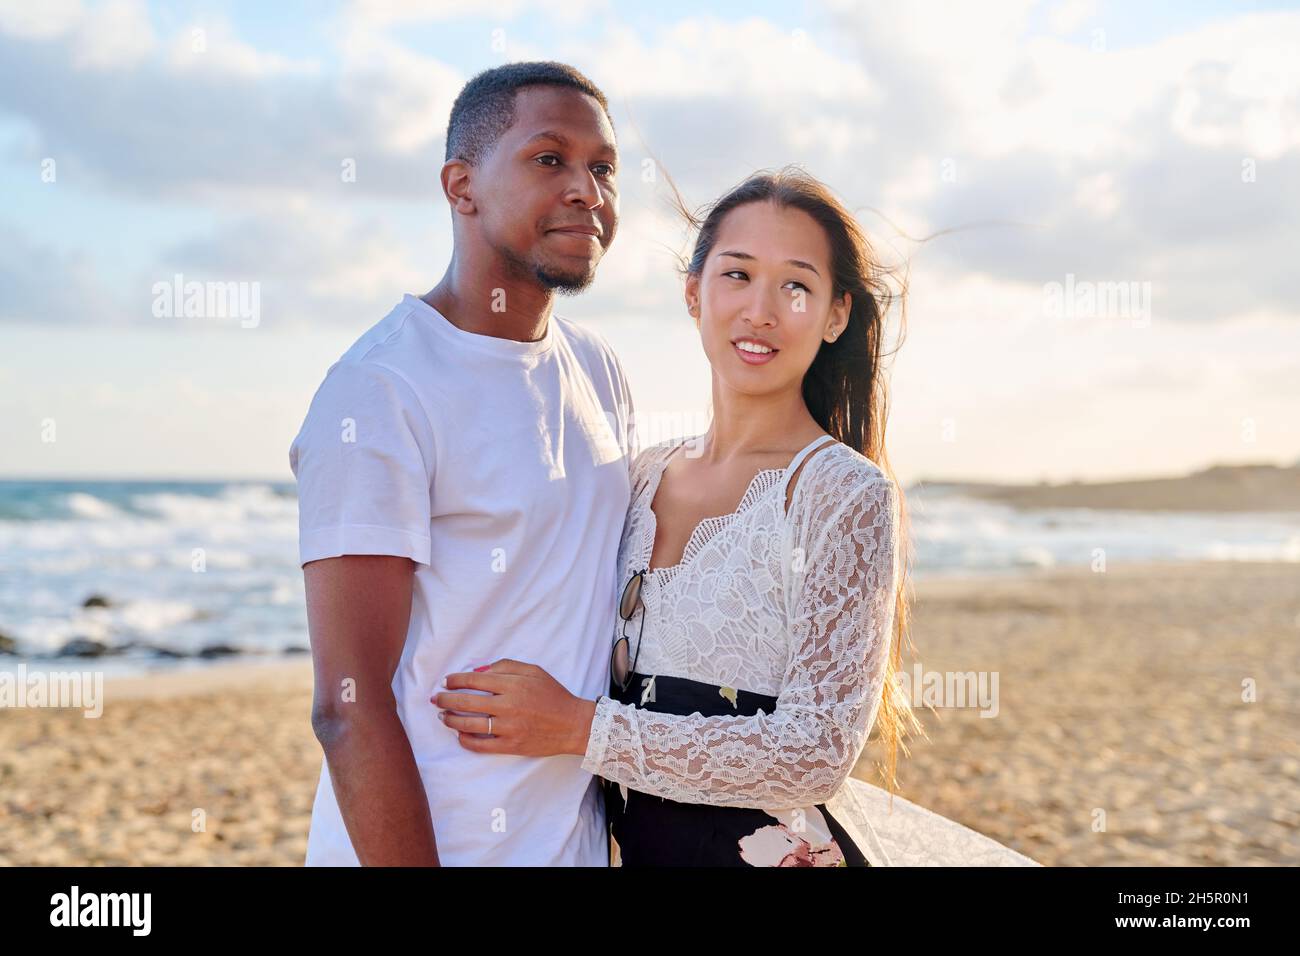 Portrait of a happy young beautiful couple on the beach Stock Photo